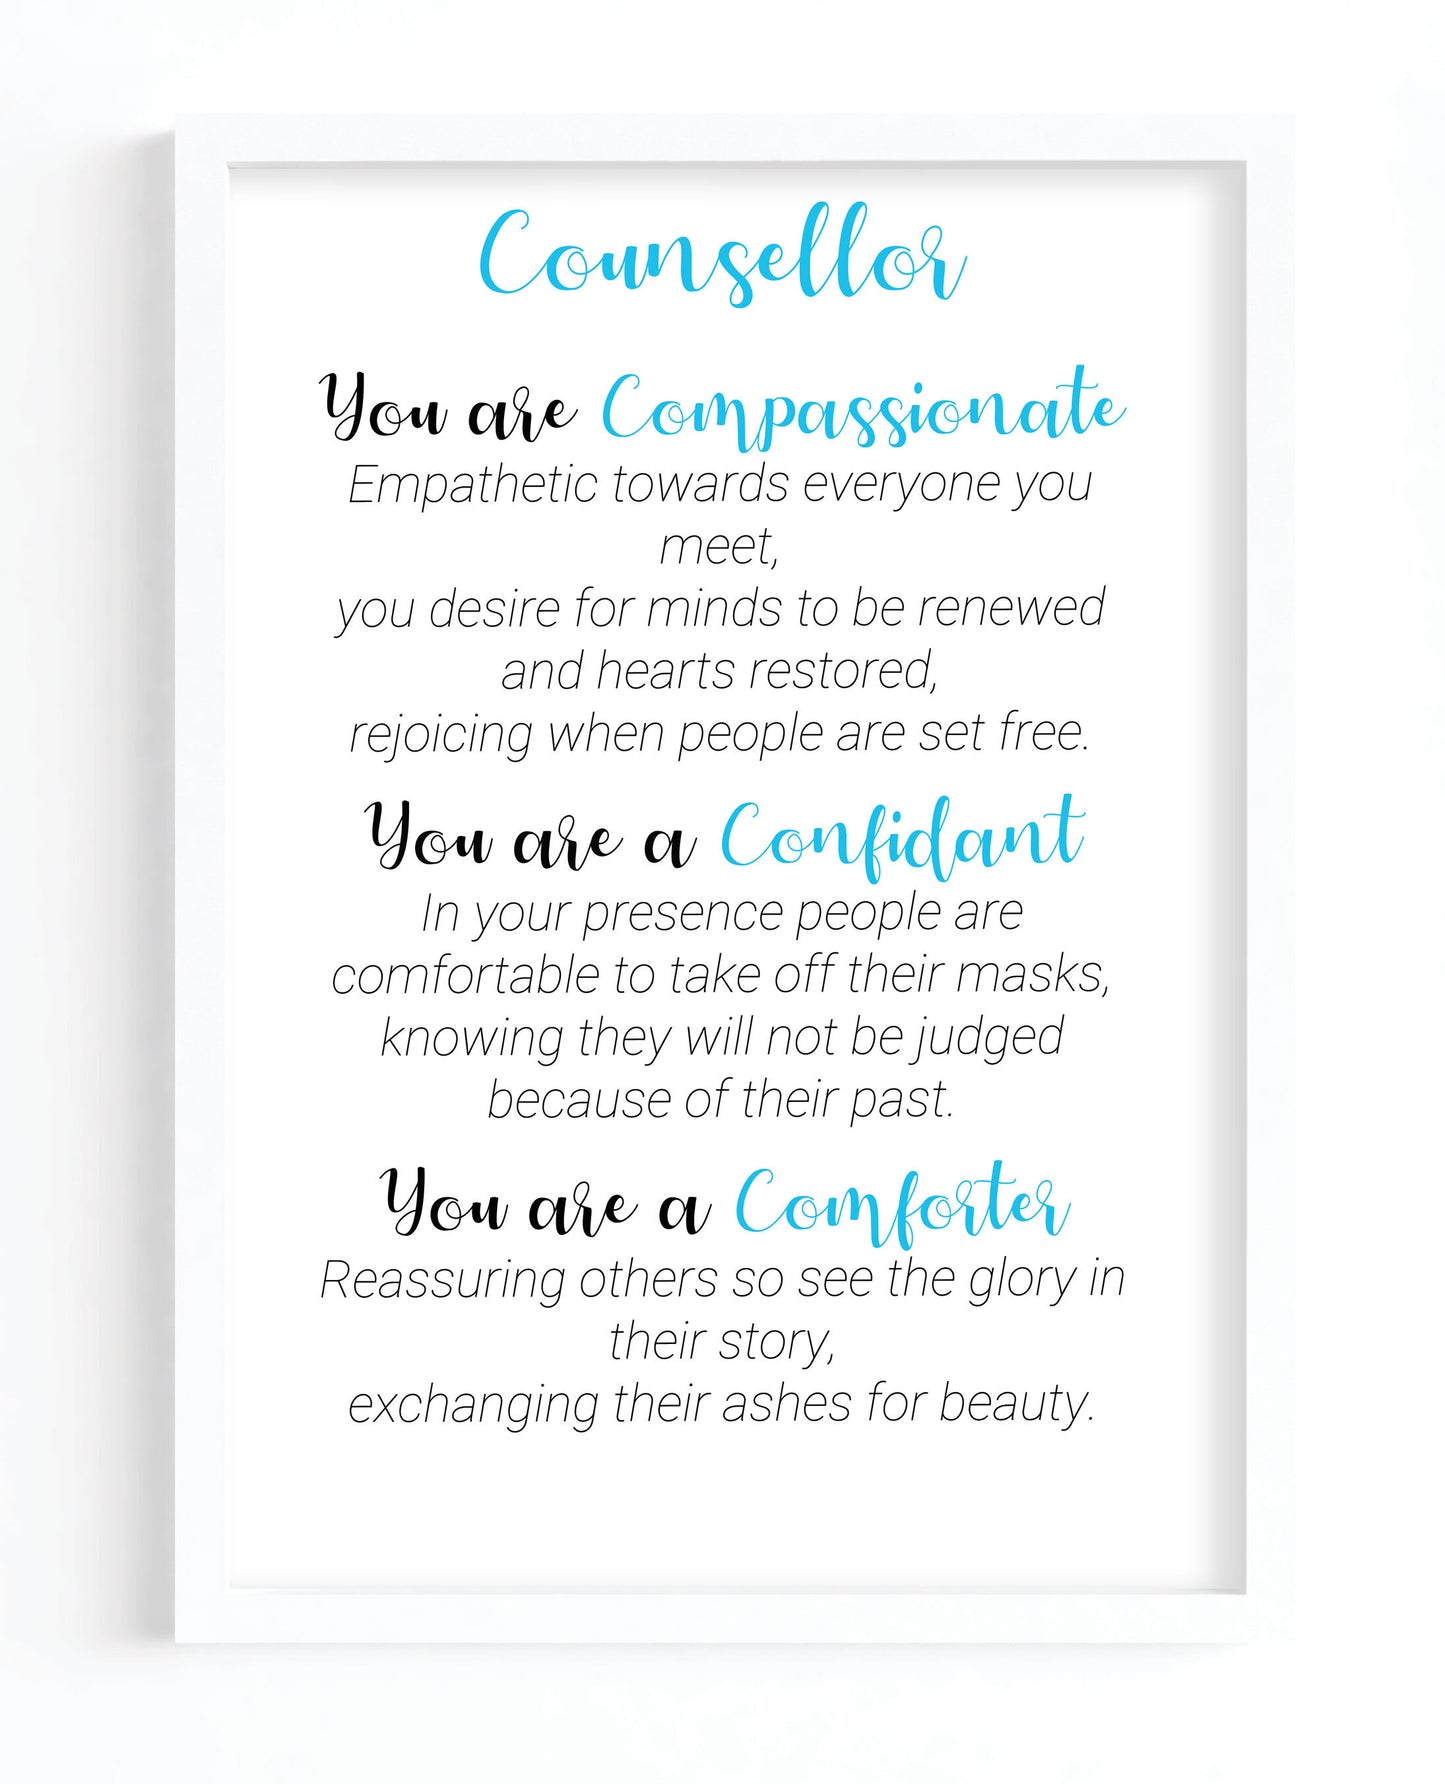 Counsellor Poem